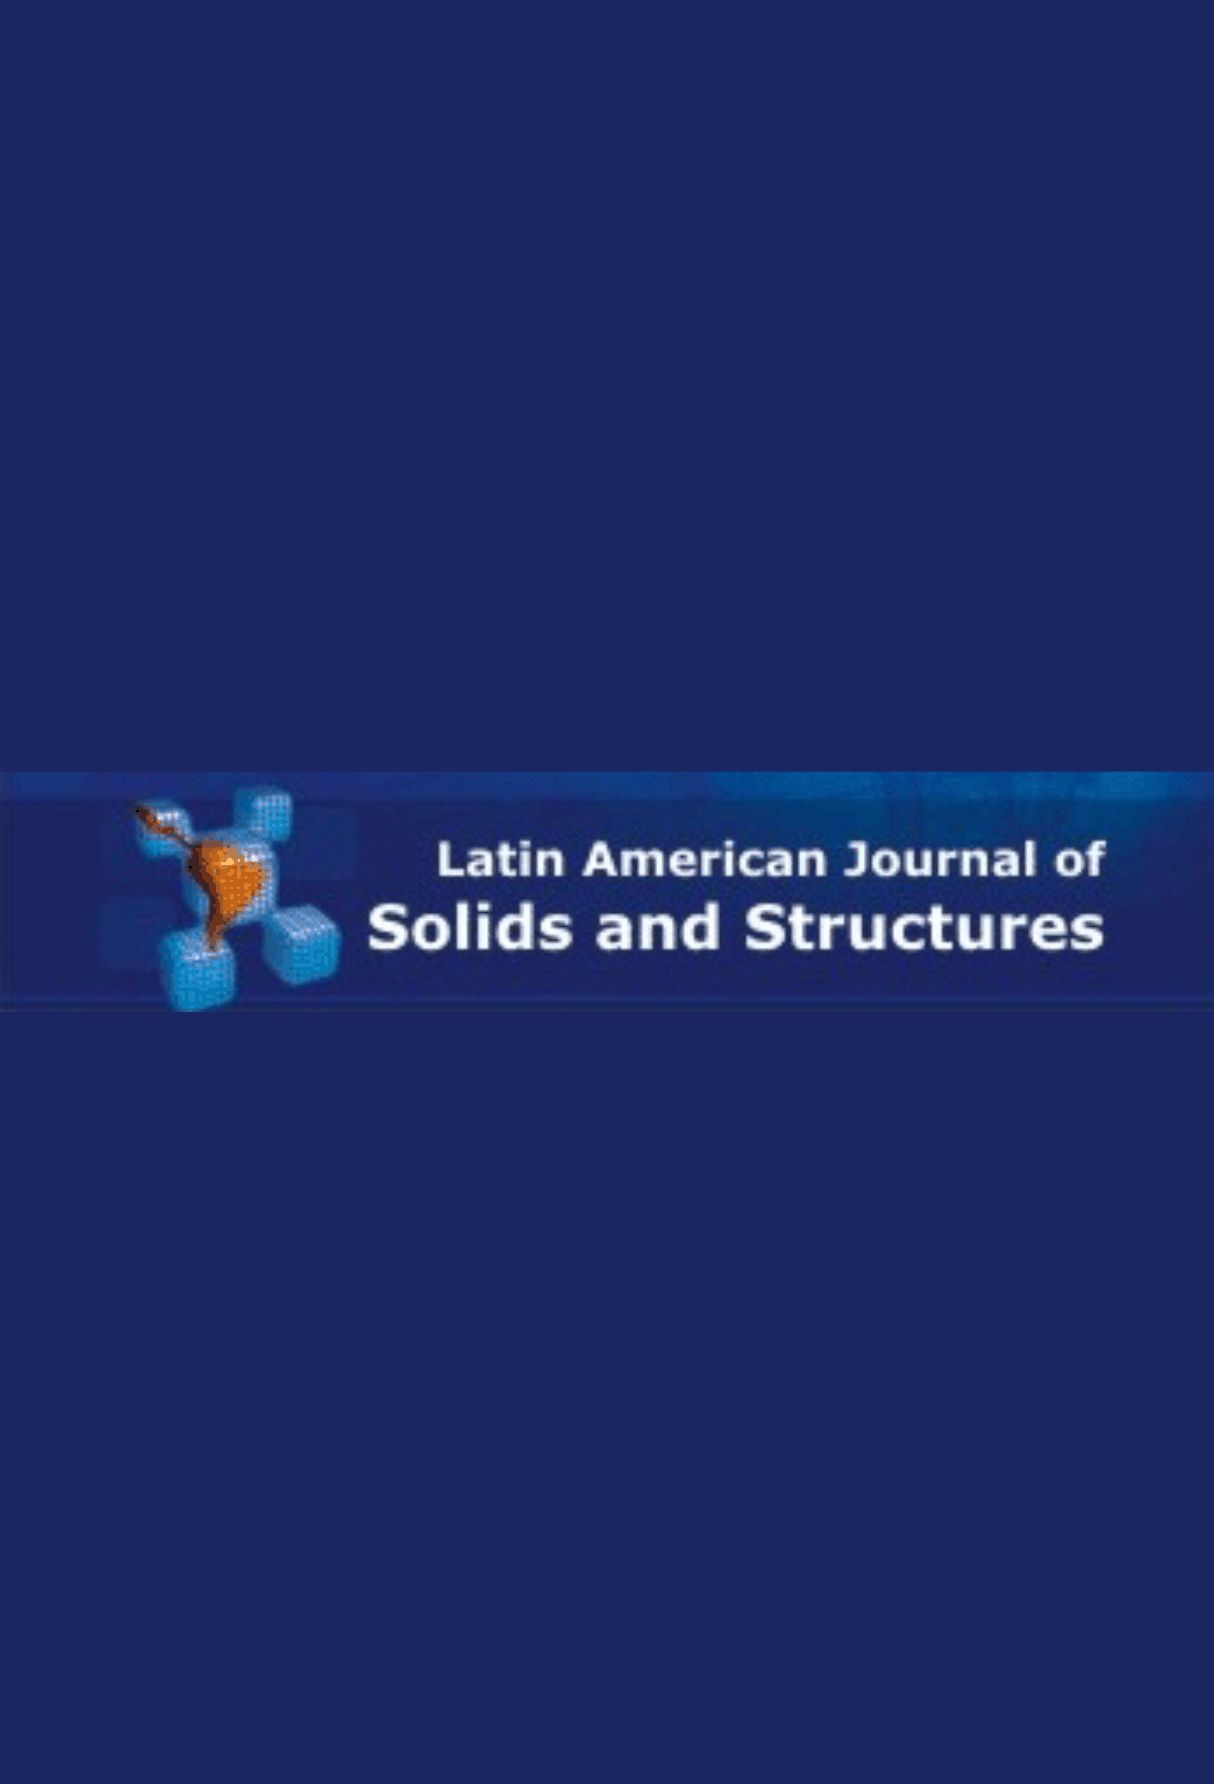 Capa: Latin American Journal of solids and Structures